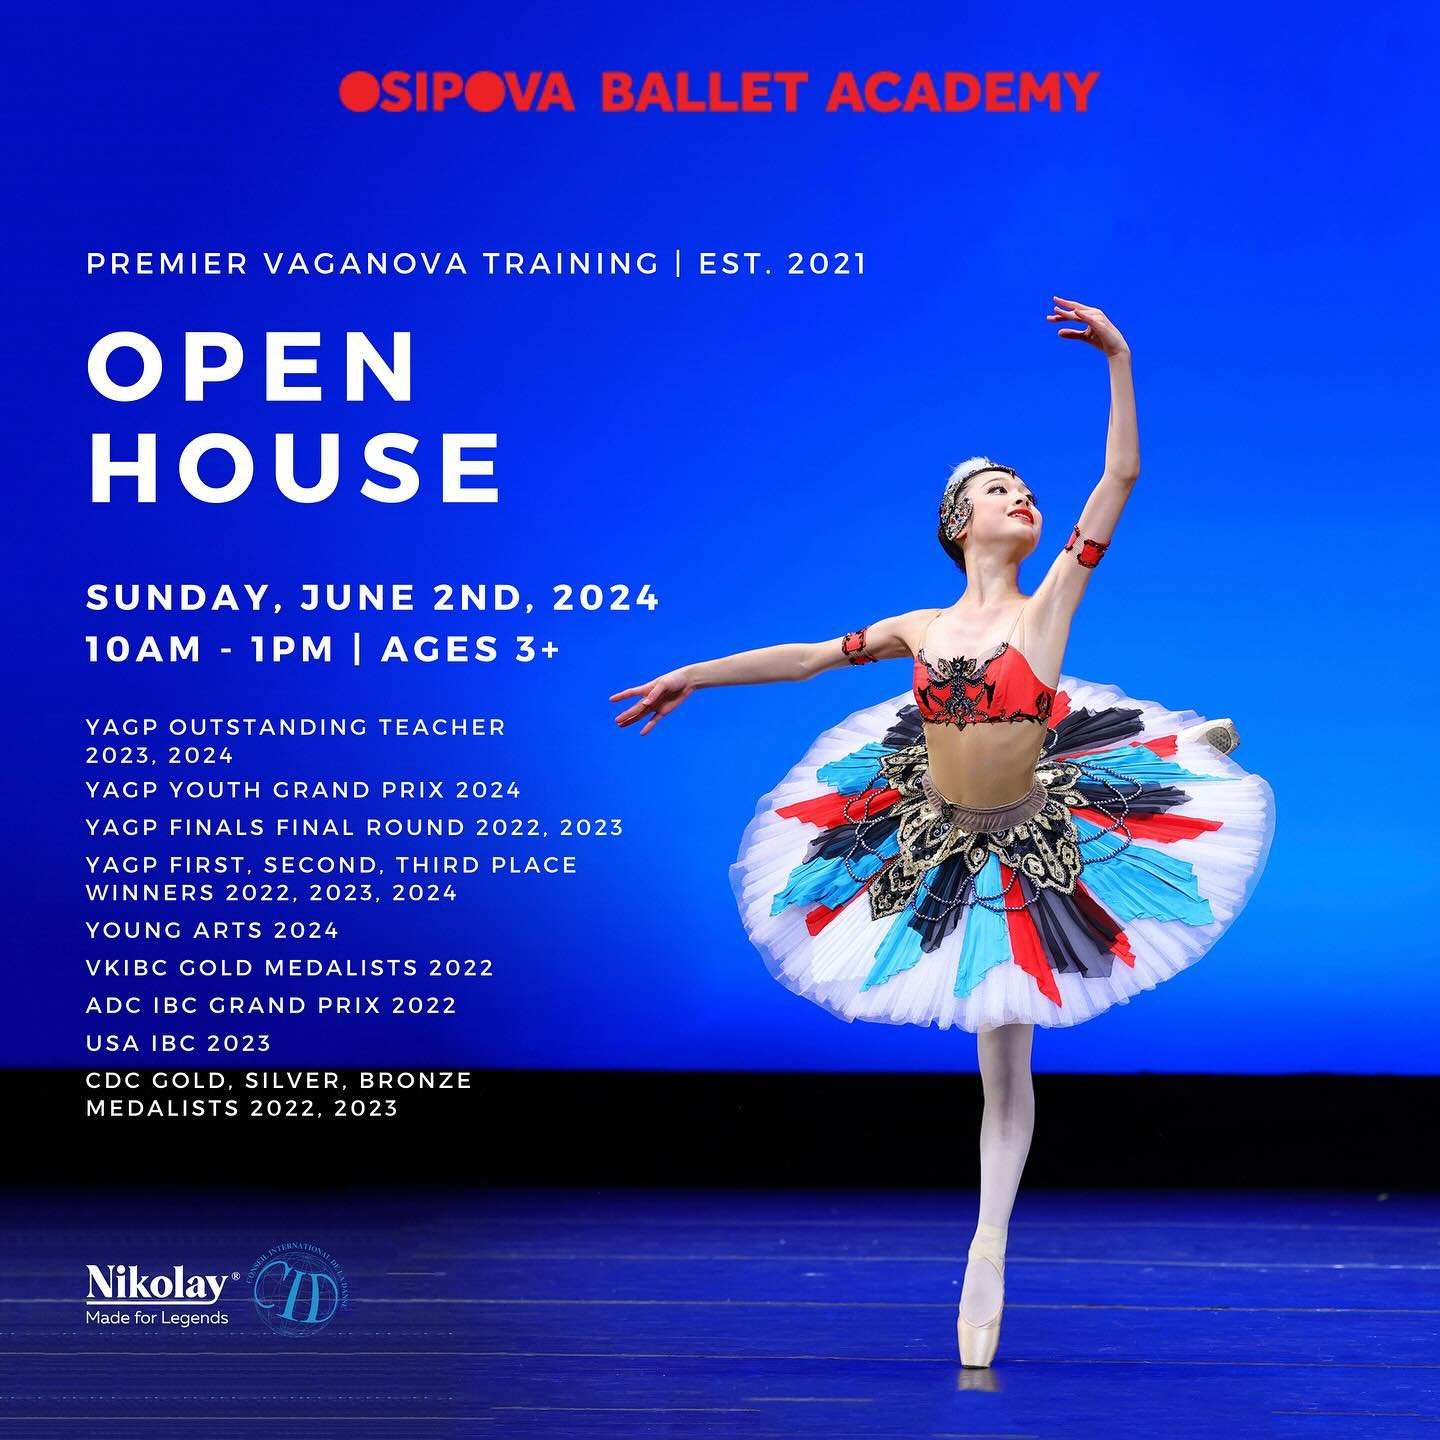 Save the date for OBA&rsquo;S ANNUAL OPEN HOUSE!

✨Sunday, June 2nd, 2024 from 10:00am-1:00pm!✨

During this &laquo;EXTRA SPECIAL DAY&raquo; we are inviting everyone to experience the following activities:
🌟Tour our MOUNTAIN VIEW FACILITIES
🌟Meet o